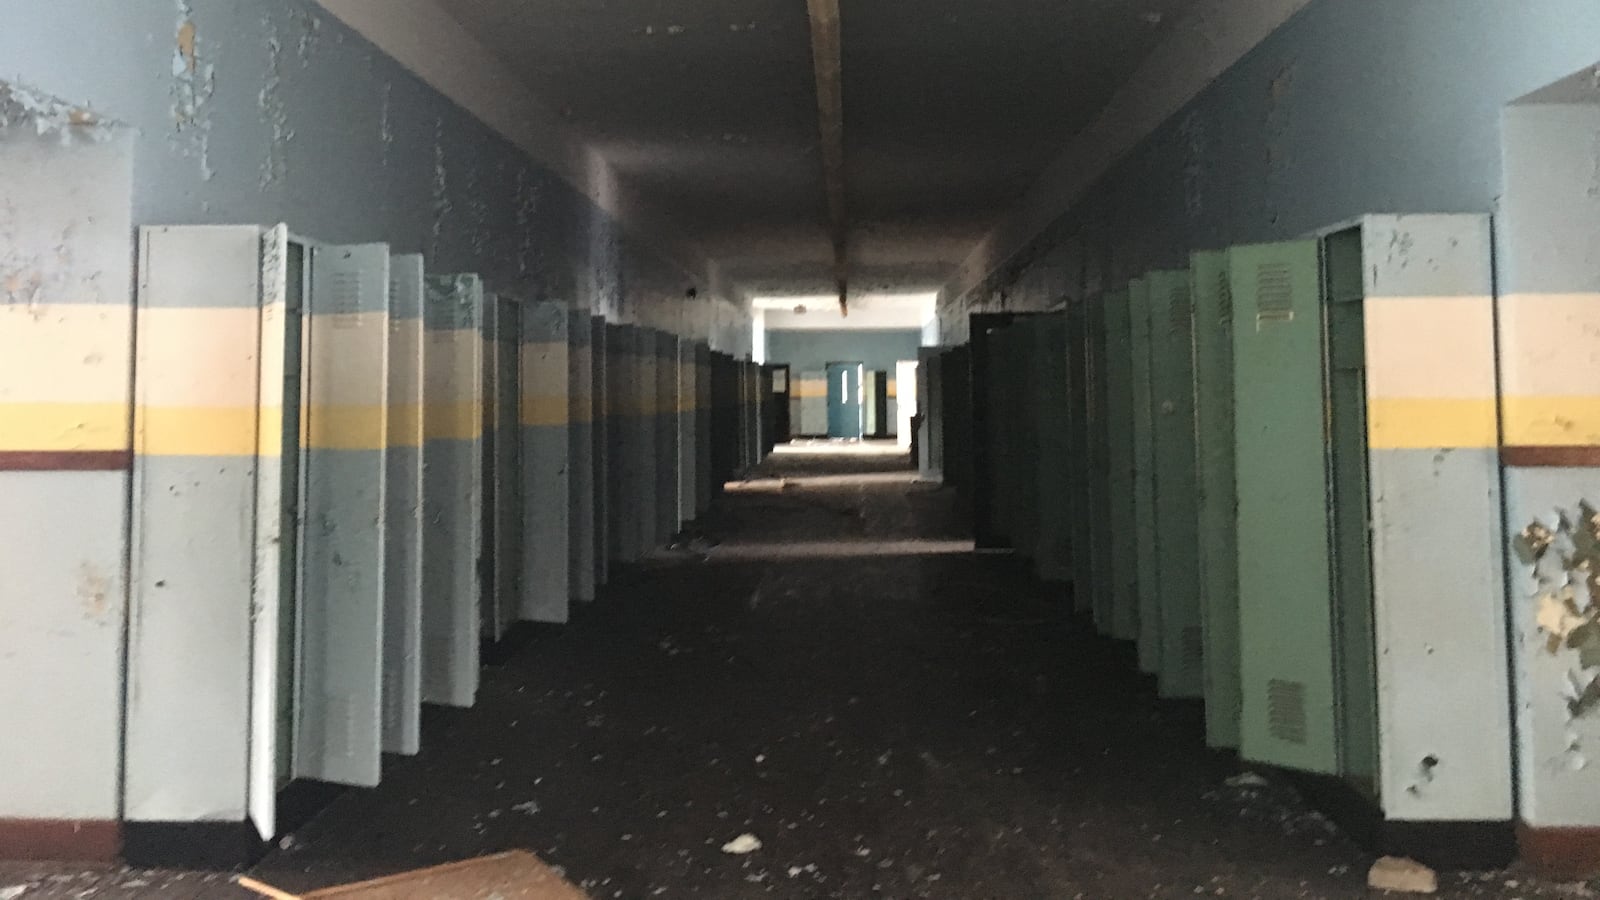 A hallway in the former Anna M. Joyce Elementary School in Detroit. The building has been vacant since 2009.